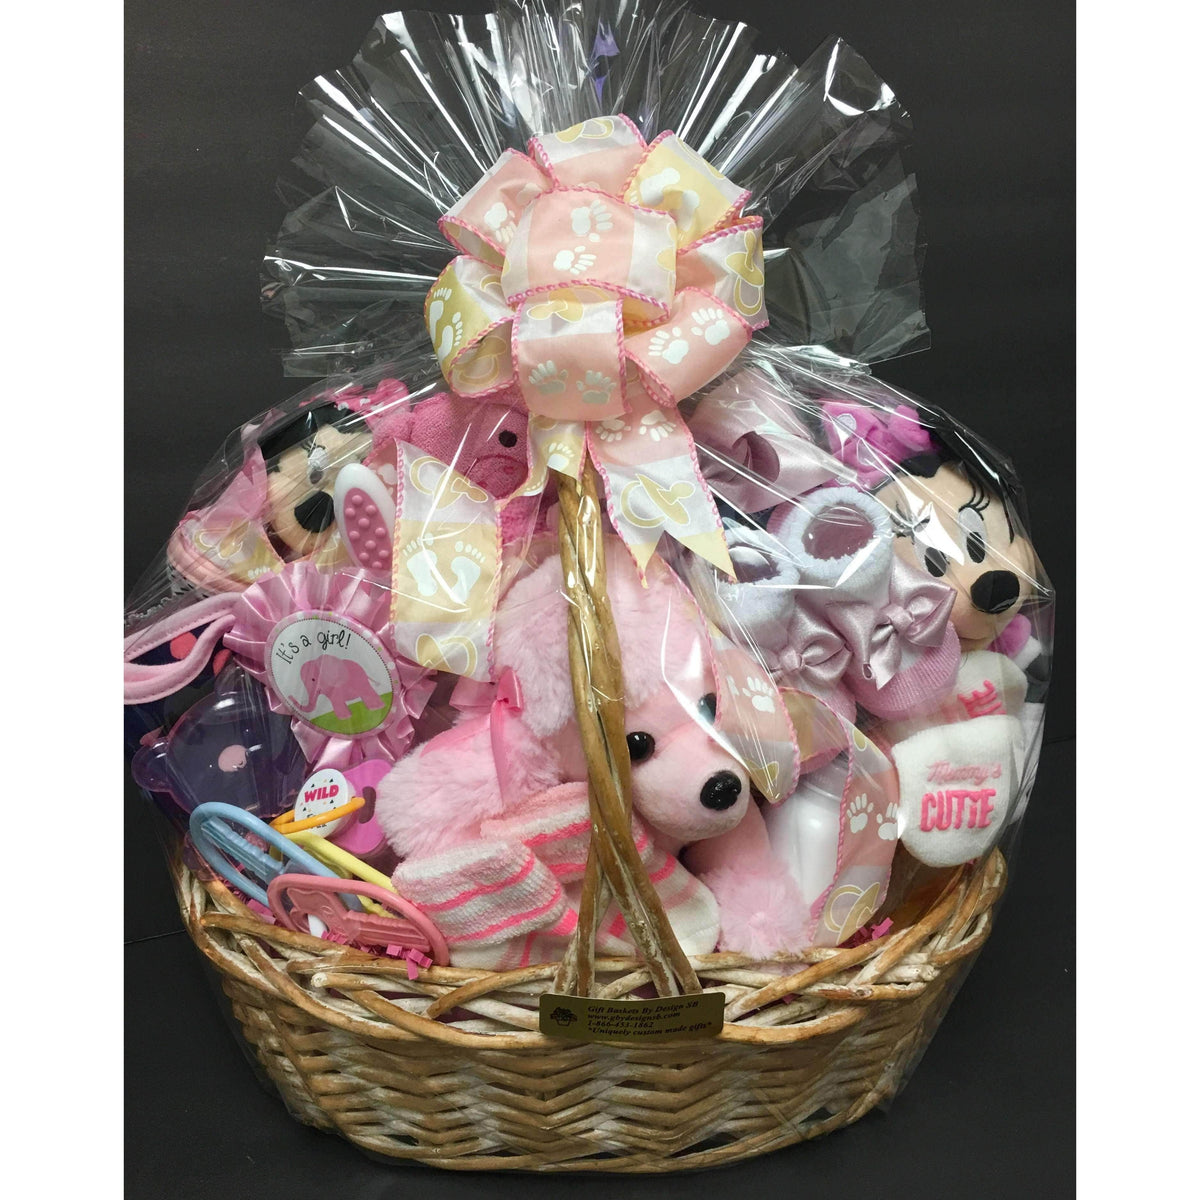 It's a Baby Gift Basket